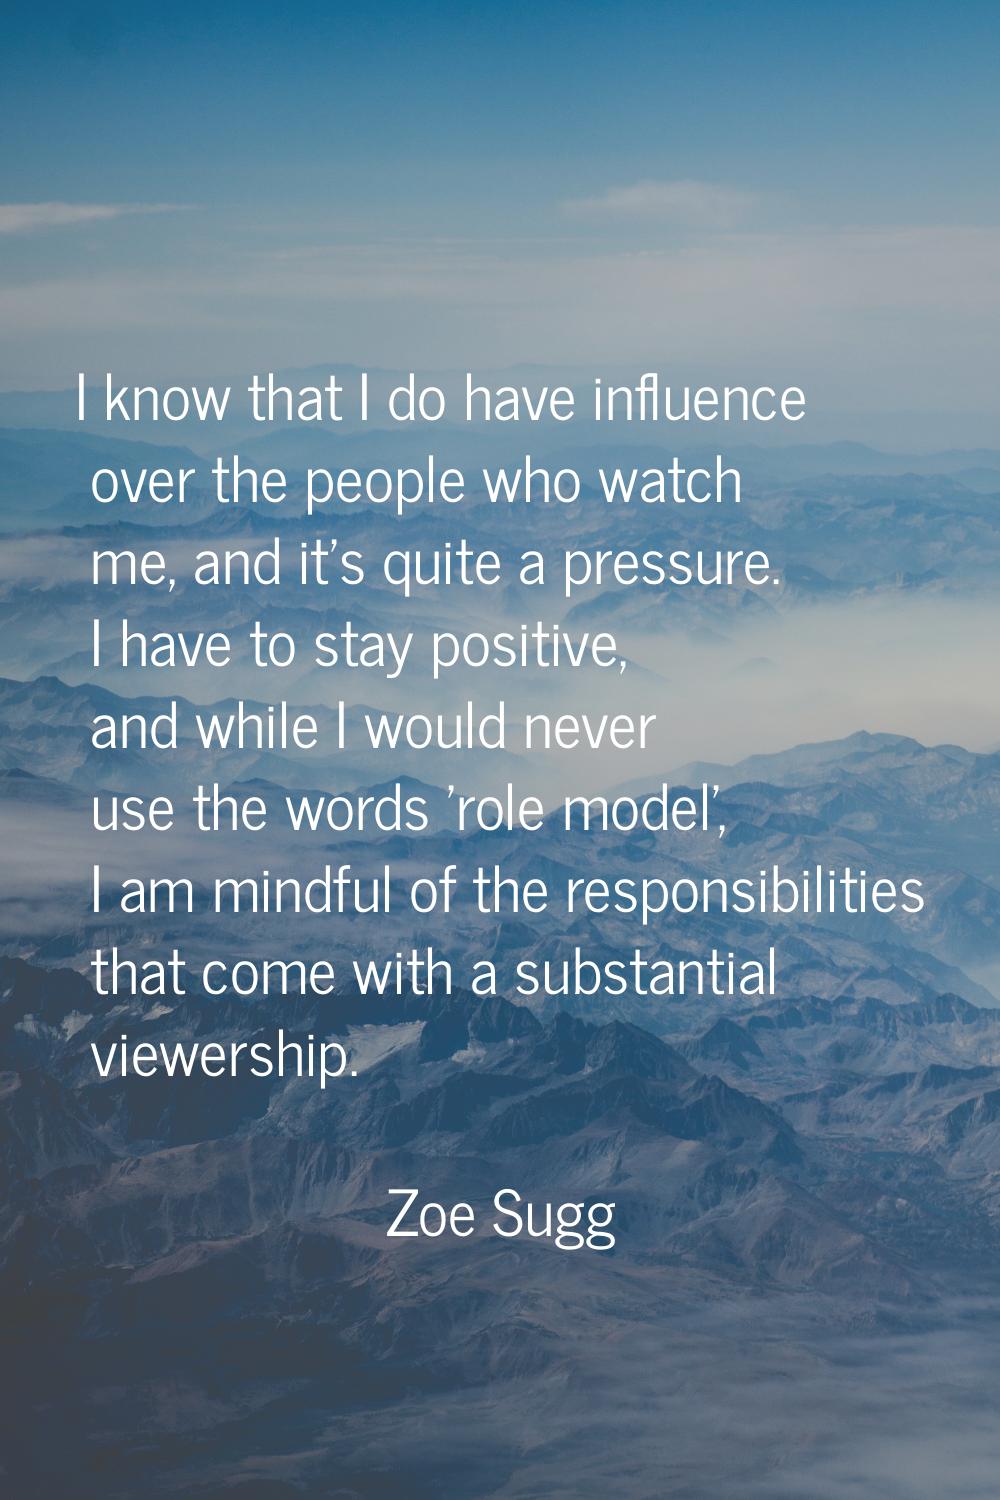 I know that I do have influence over the people who watch me, and it's quite a pressure. I have to 